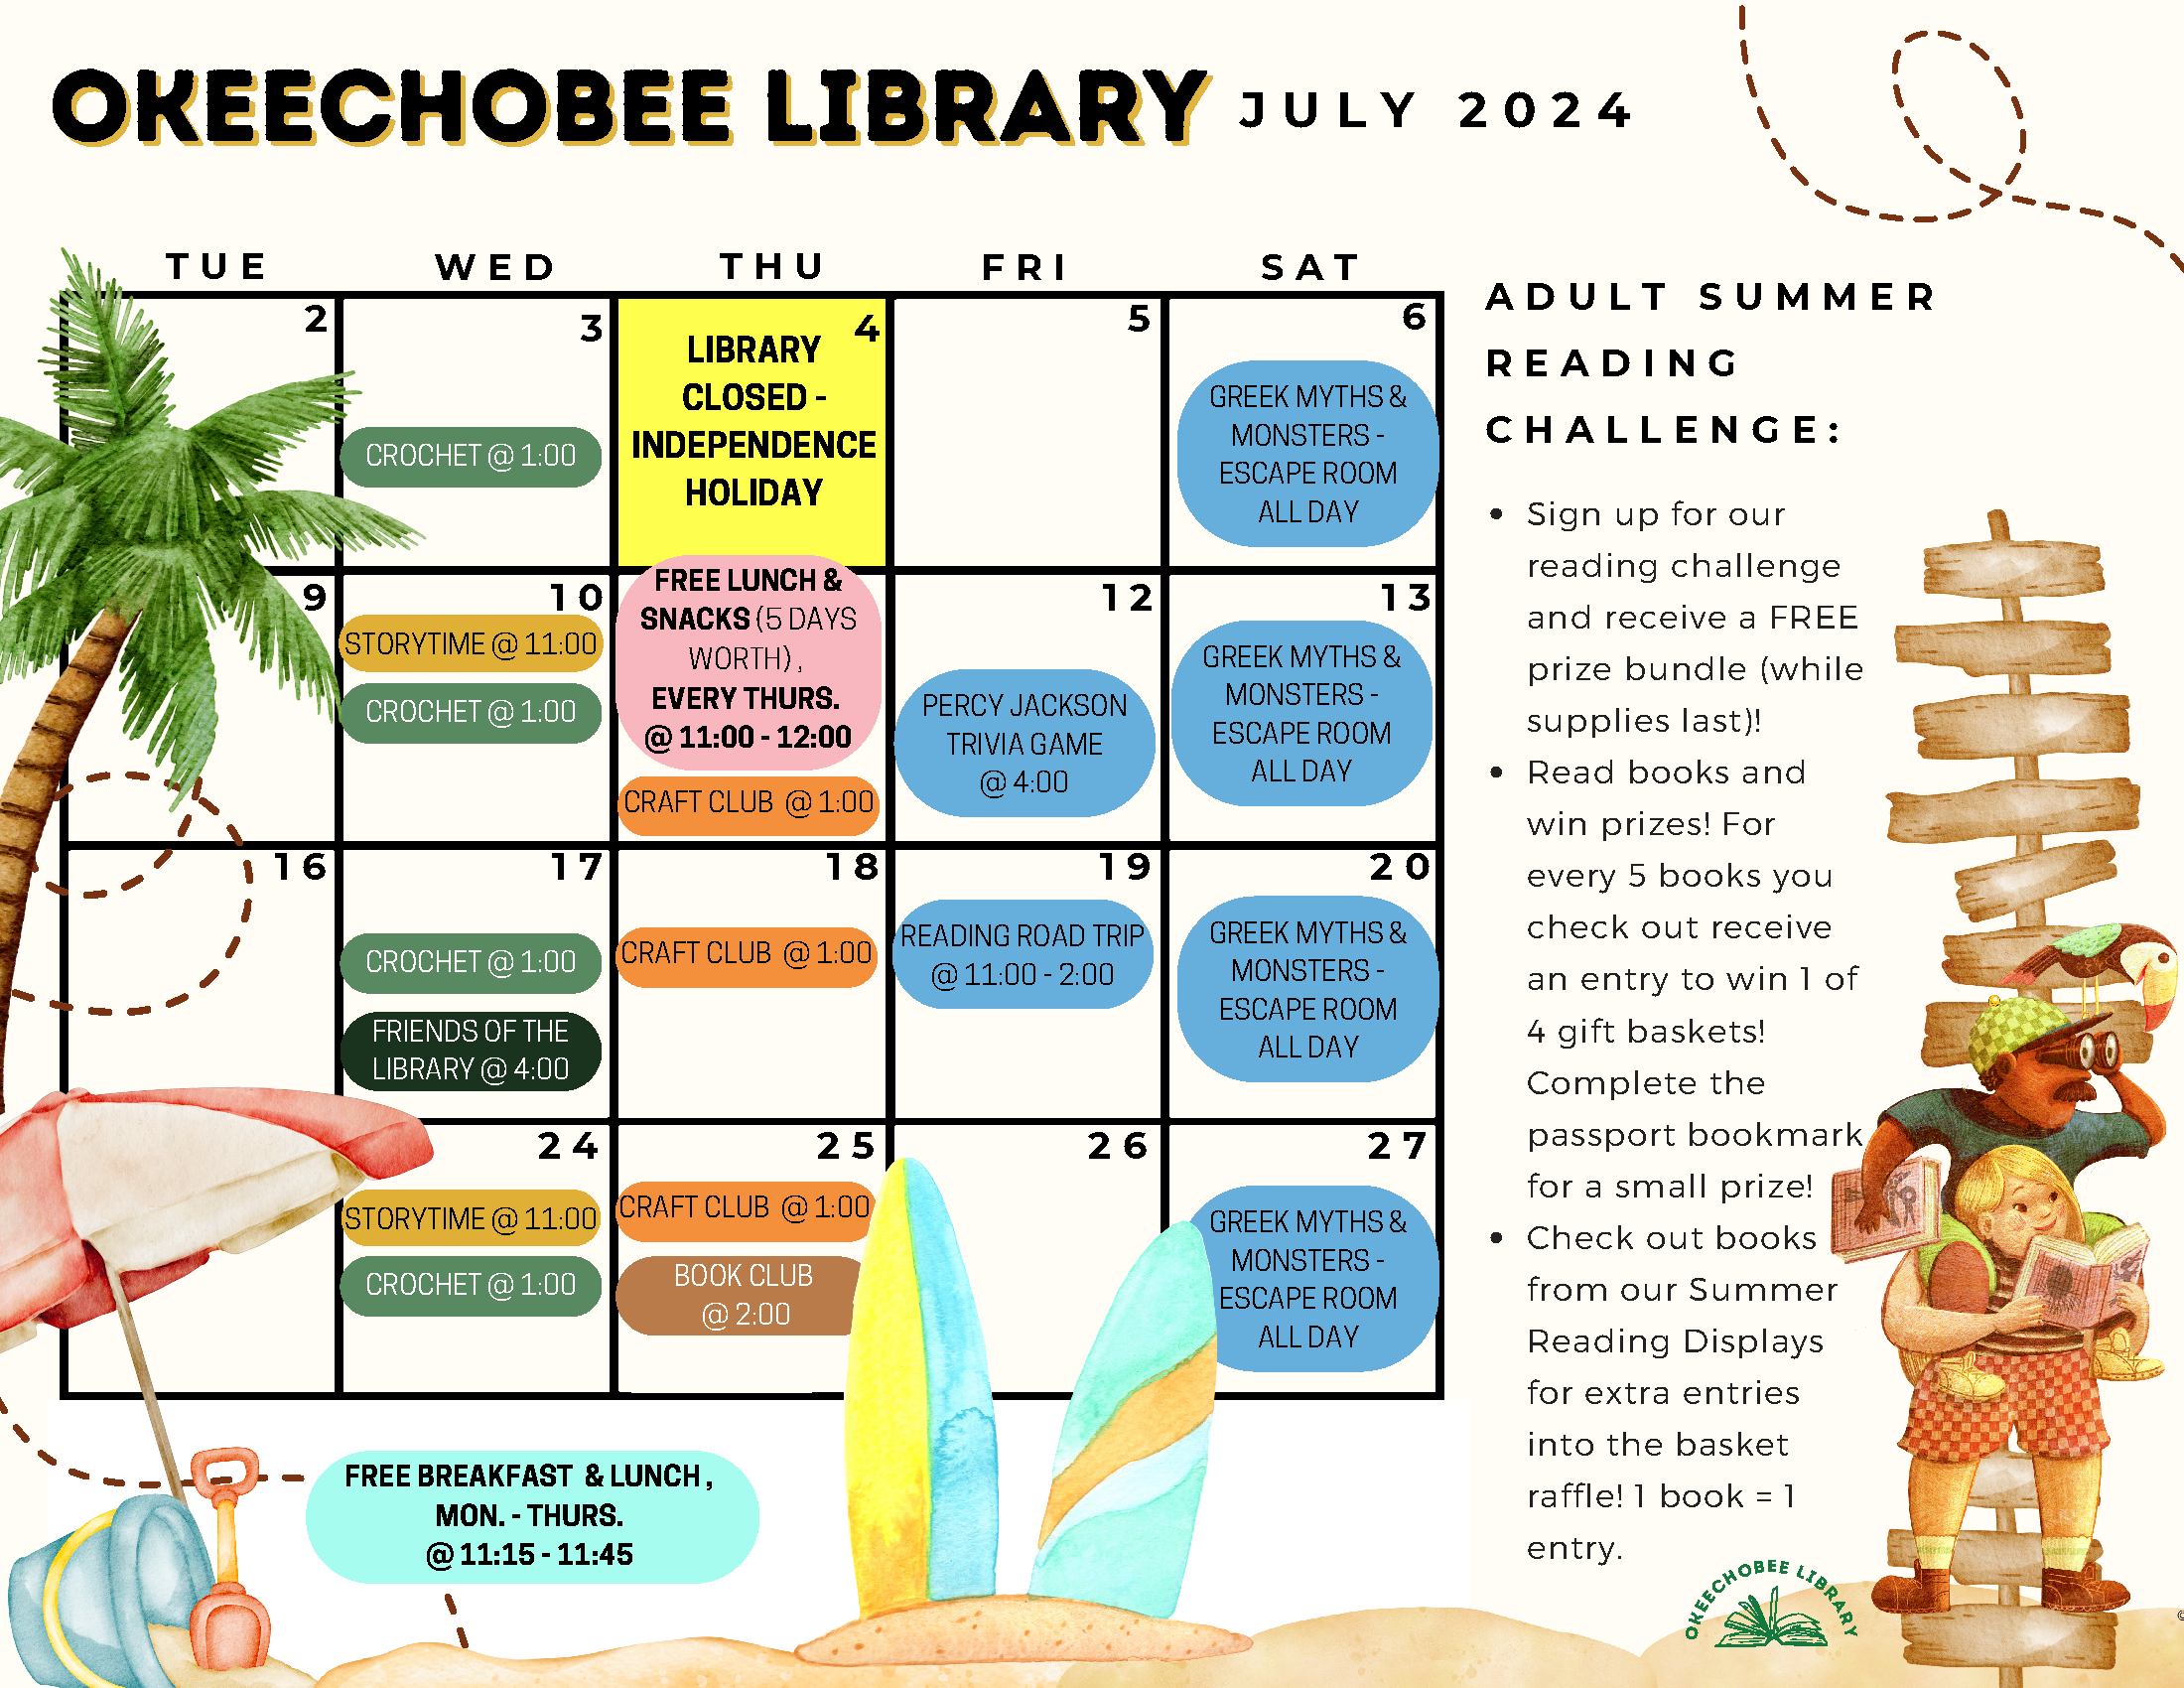 Adventure begins at the Okeechobee County Library! Check out our Summer Reading brochure for more details on challenges, shows, prizes, games, and more coming this summer at the Library! And be sure to visit the Library starting May 28th to sign up for our Summer Reading Challenges and to claim your sign up prize bundles (while supplies last)! Click this link or this image for the PDF version of the calendar graphic.